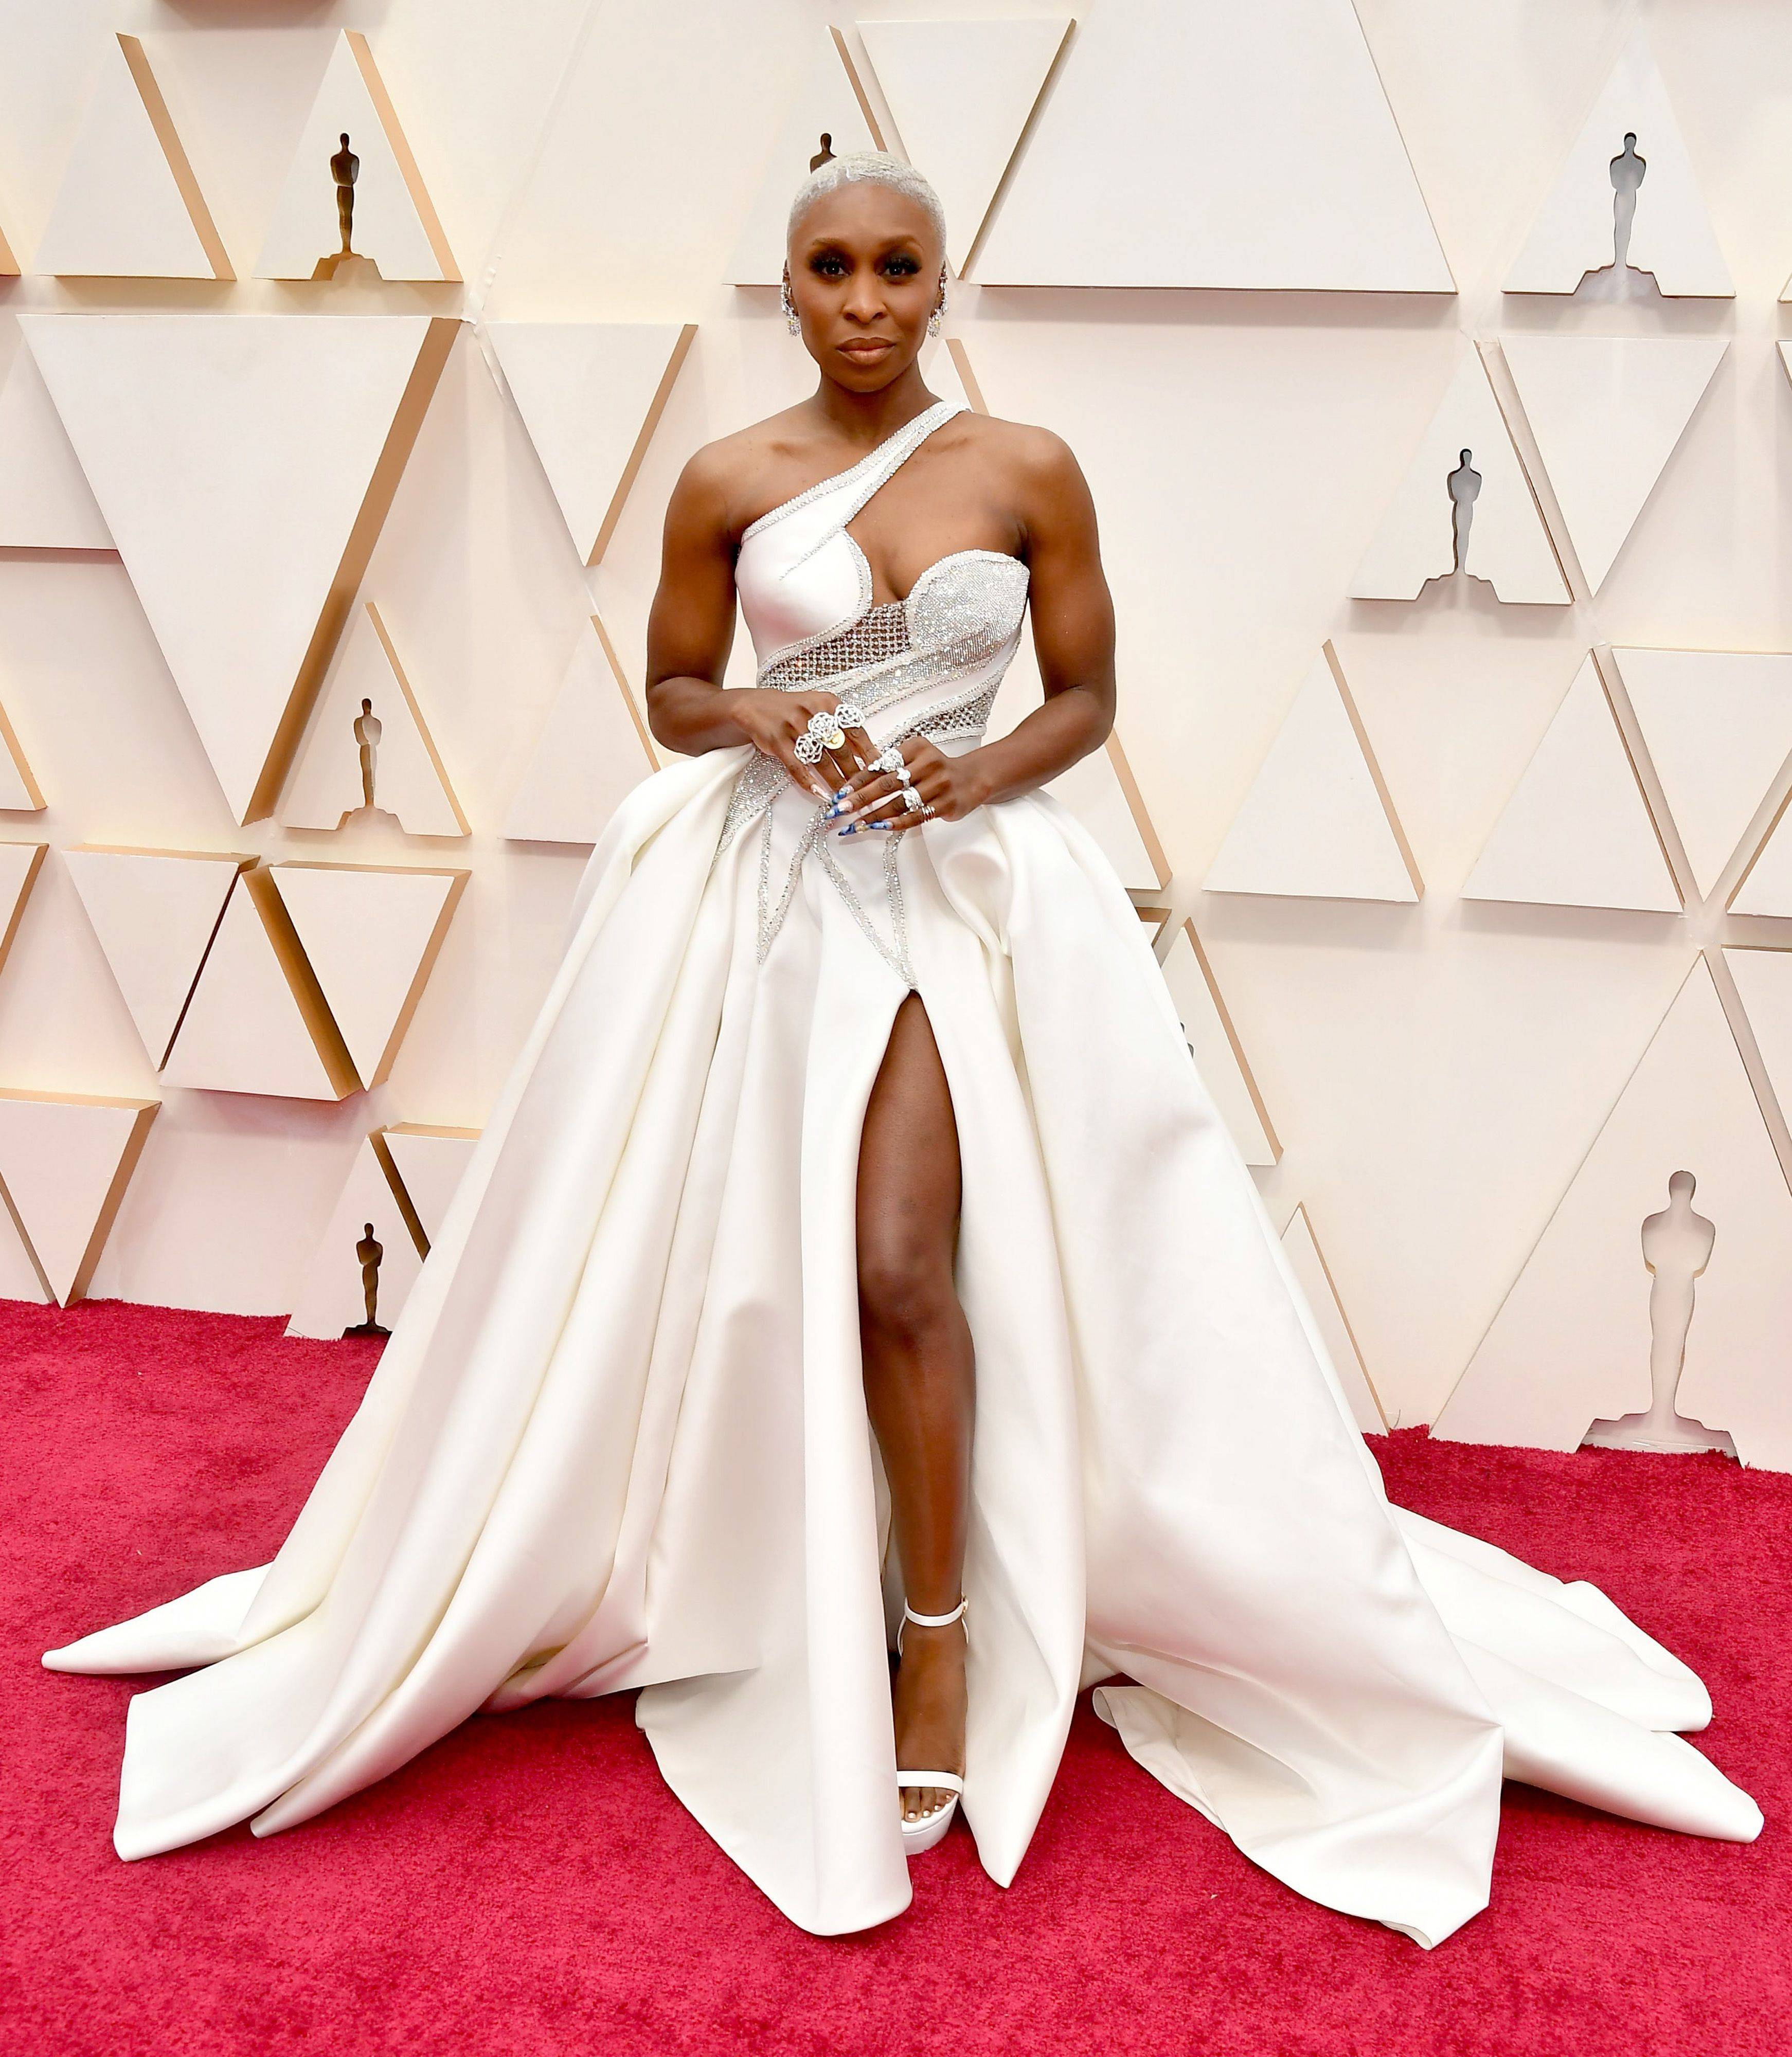 HOLLYWOOD, CALIFORNIA - FEBRUARY 09: Cynthia Erivo attends the 92nd Annual Academy Awards at Hollywood and Highland on February 09, 2020 in Hollywood, California. (Photo by Amy Sussman/Getty Images)